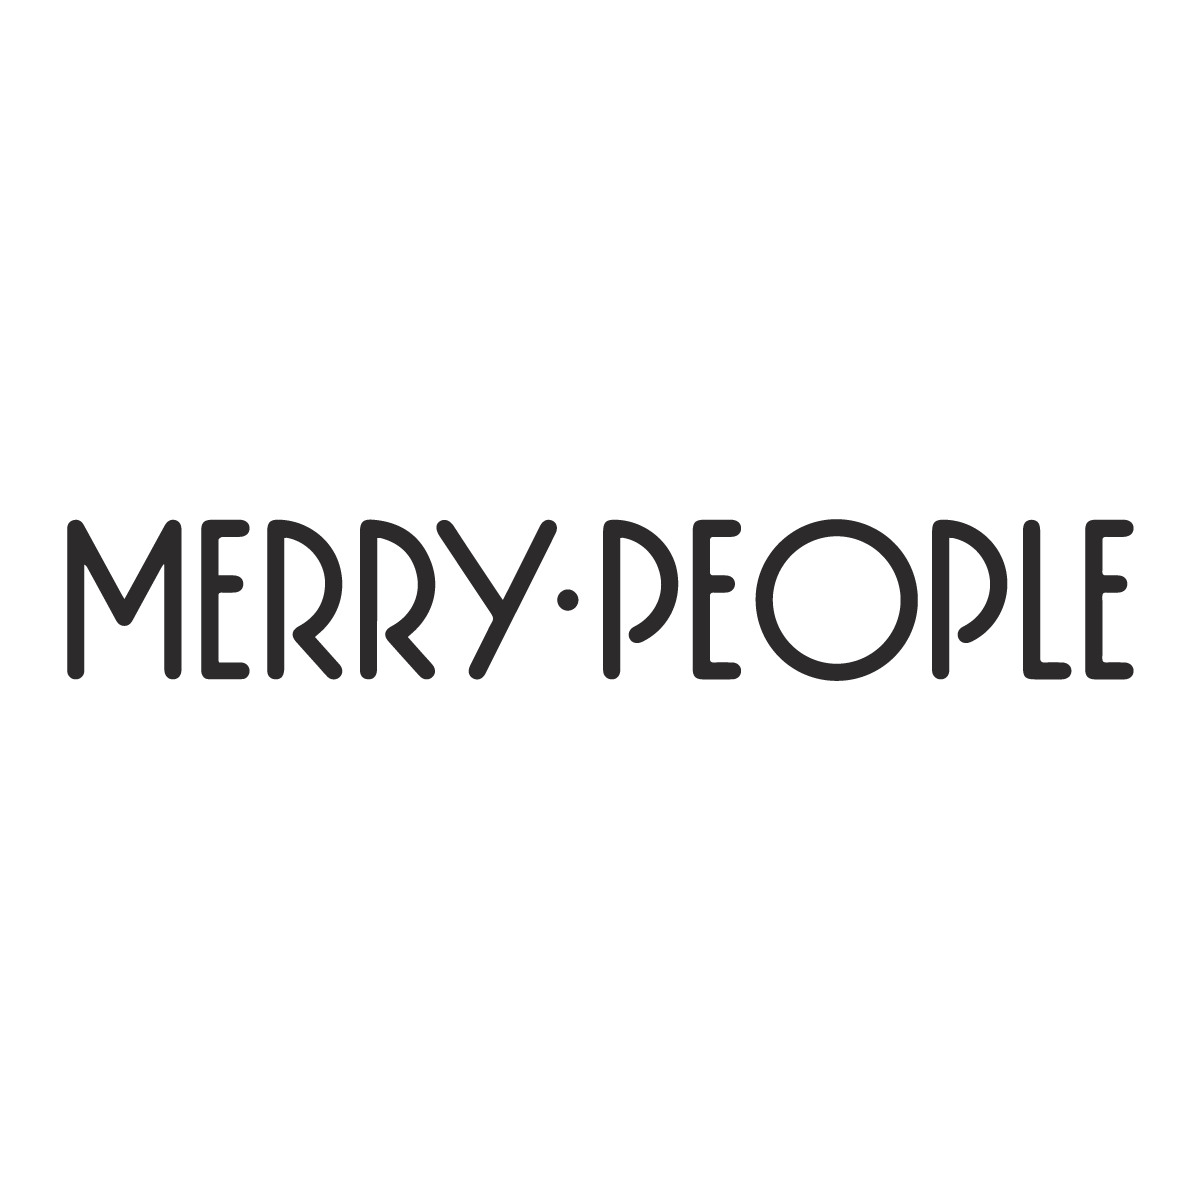 Merry People.png